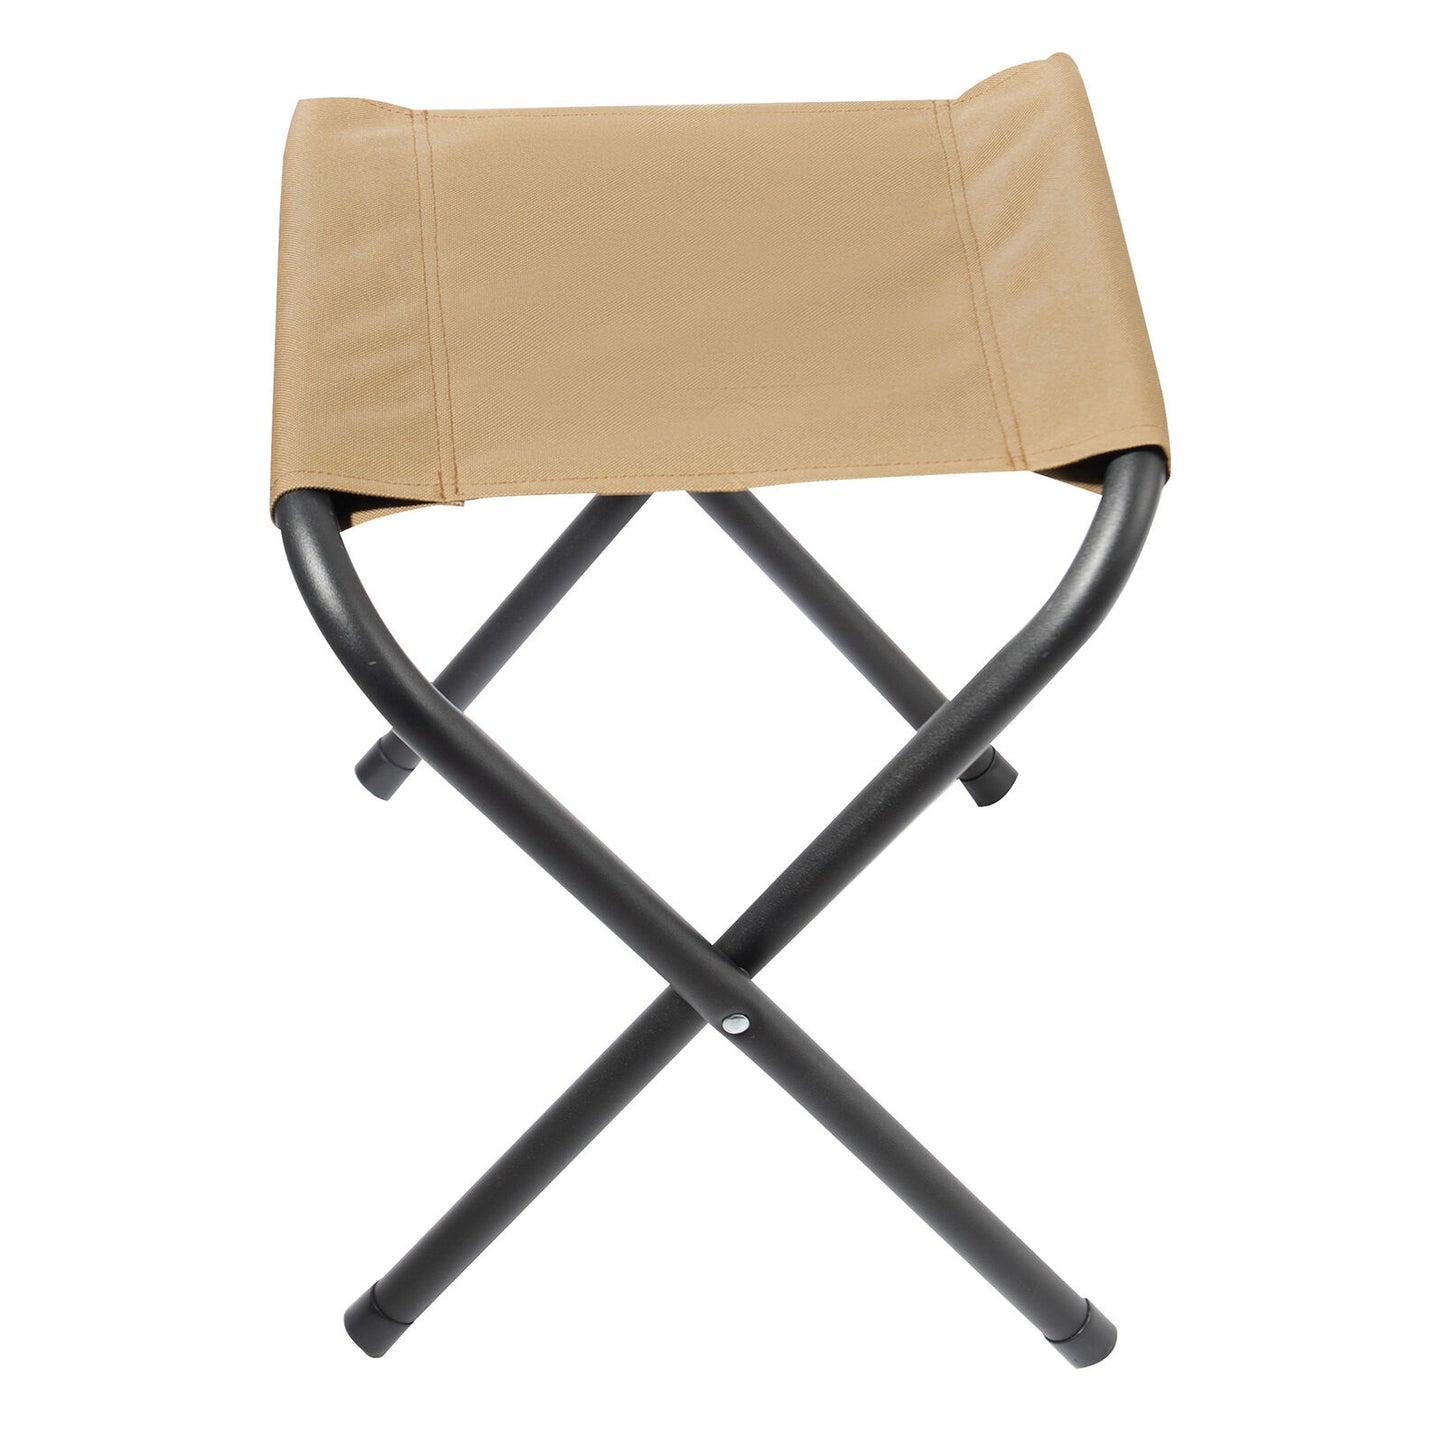 Coyote Brown Lightweight Folding Camp Stool